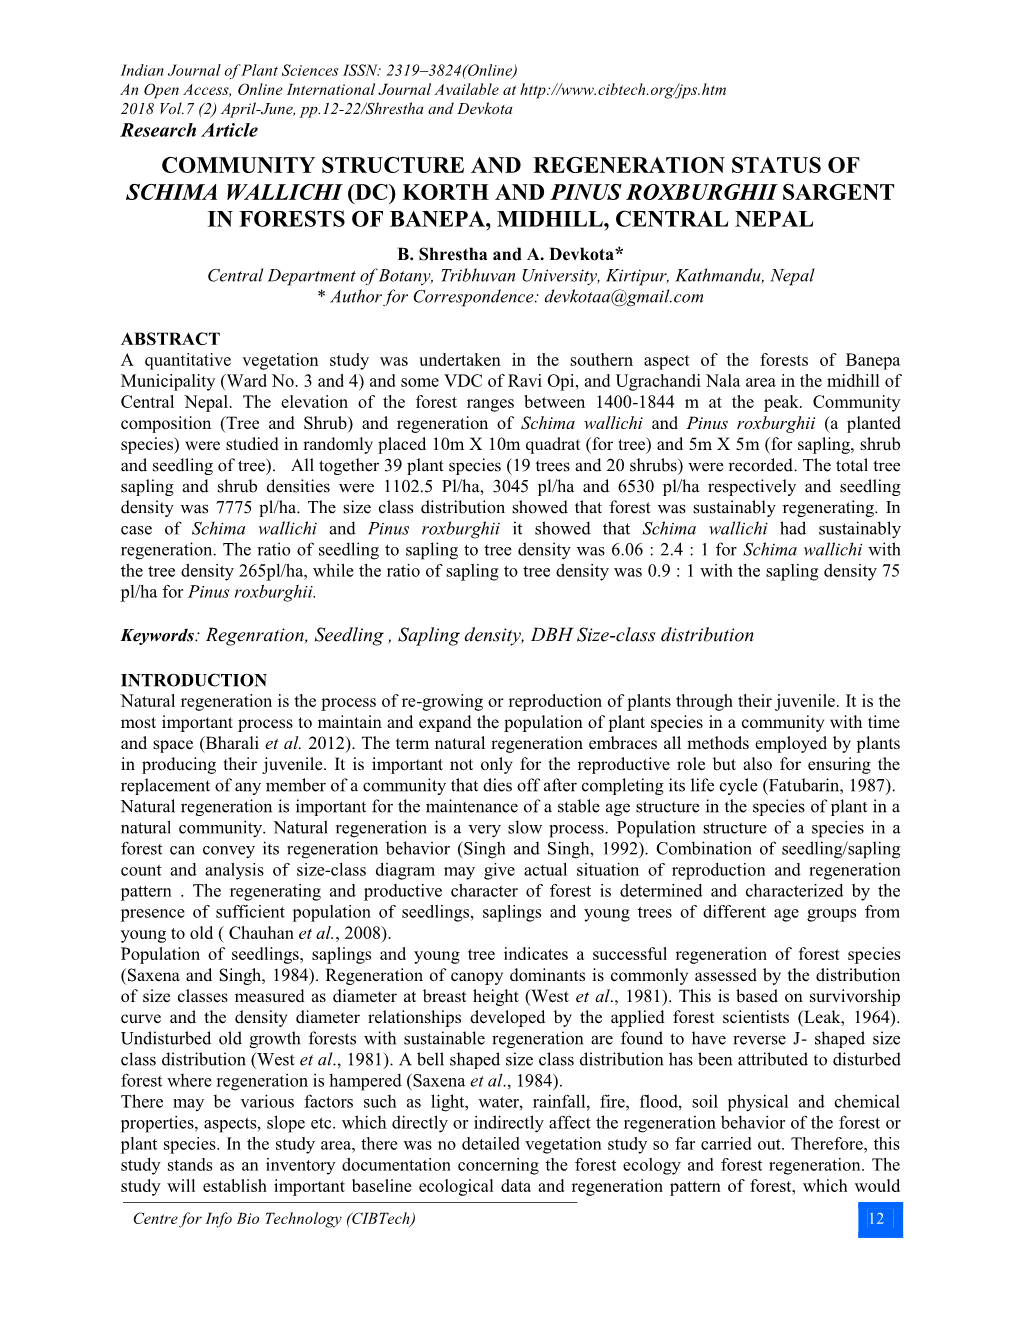 Community Structure and Regeneration Status of Schima Wallichi (Dc) Korth and Pinus Roxburghii Sargent in Forests of Banepa, Midhill, Central Nepal B